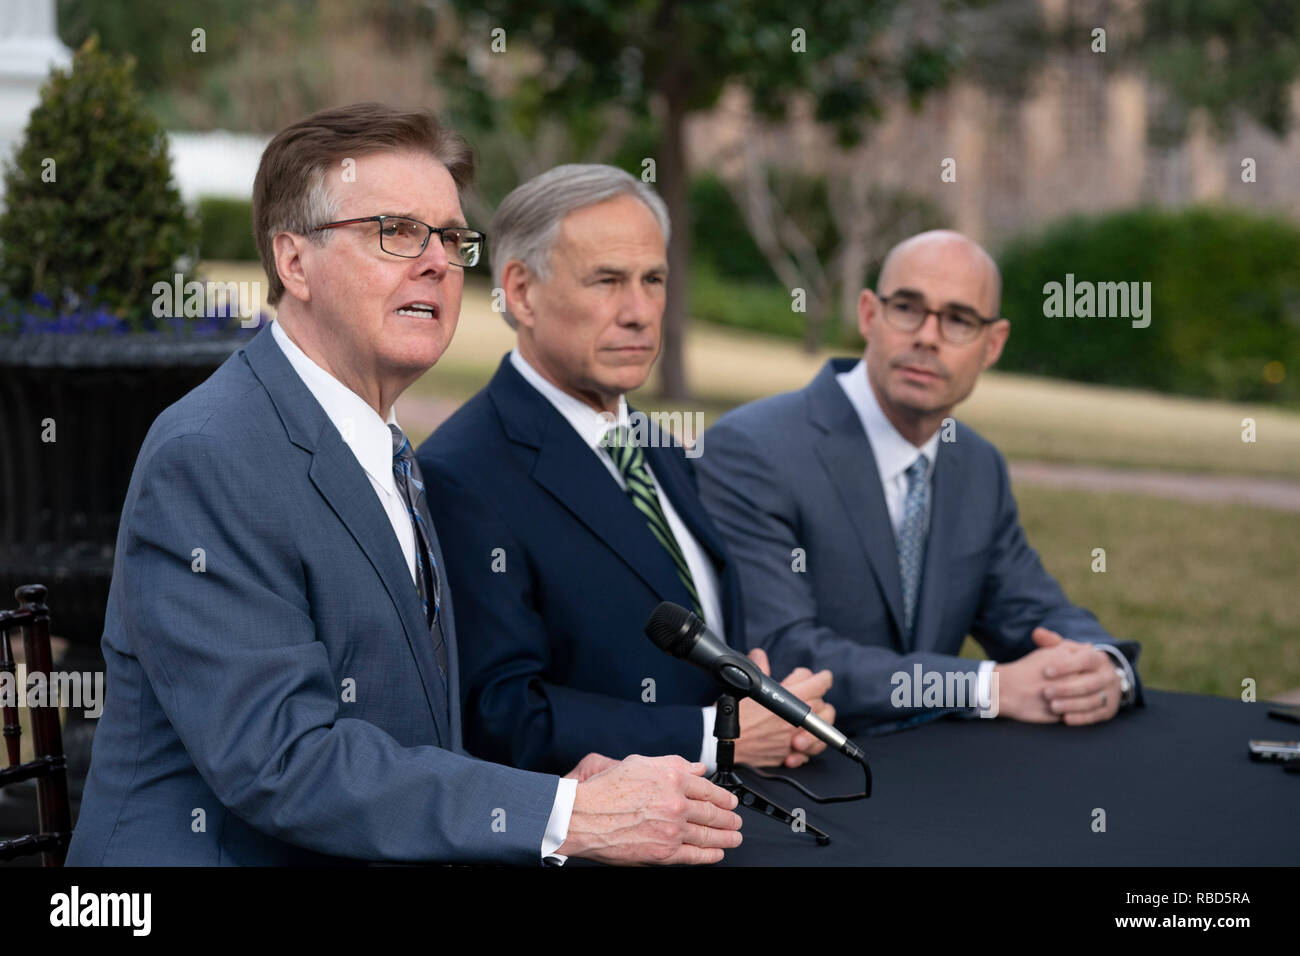 The leaders of Texas government, (from left) Lt. Gov. Dan Patrick, Gov. Greg Abbott and House Speaker Dennis Bonnen, meet the press outside the Governor's Mansion in Austin the day after the start of the 86th legislative session. Stock Photo